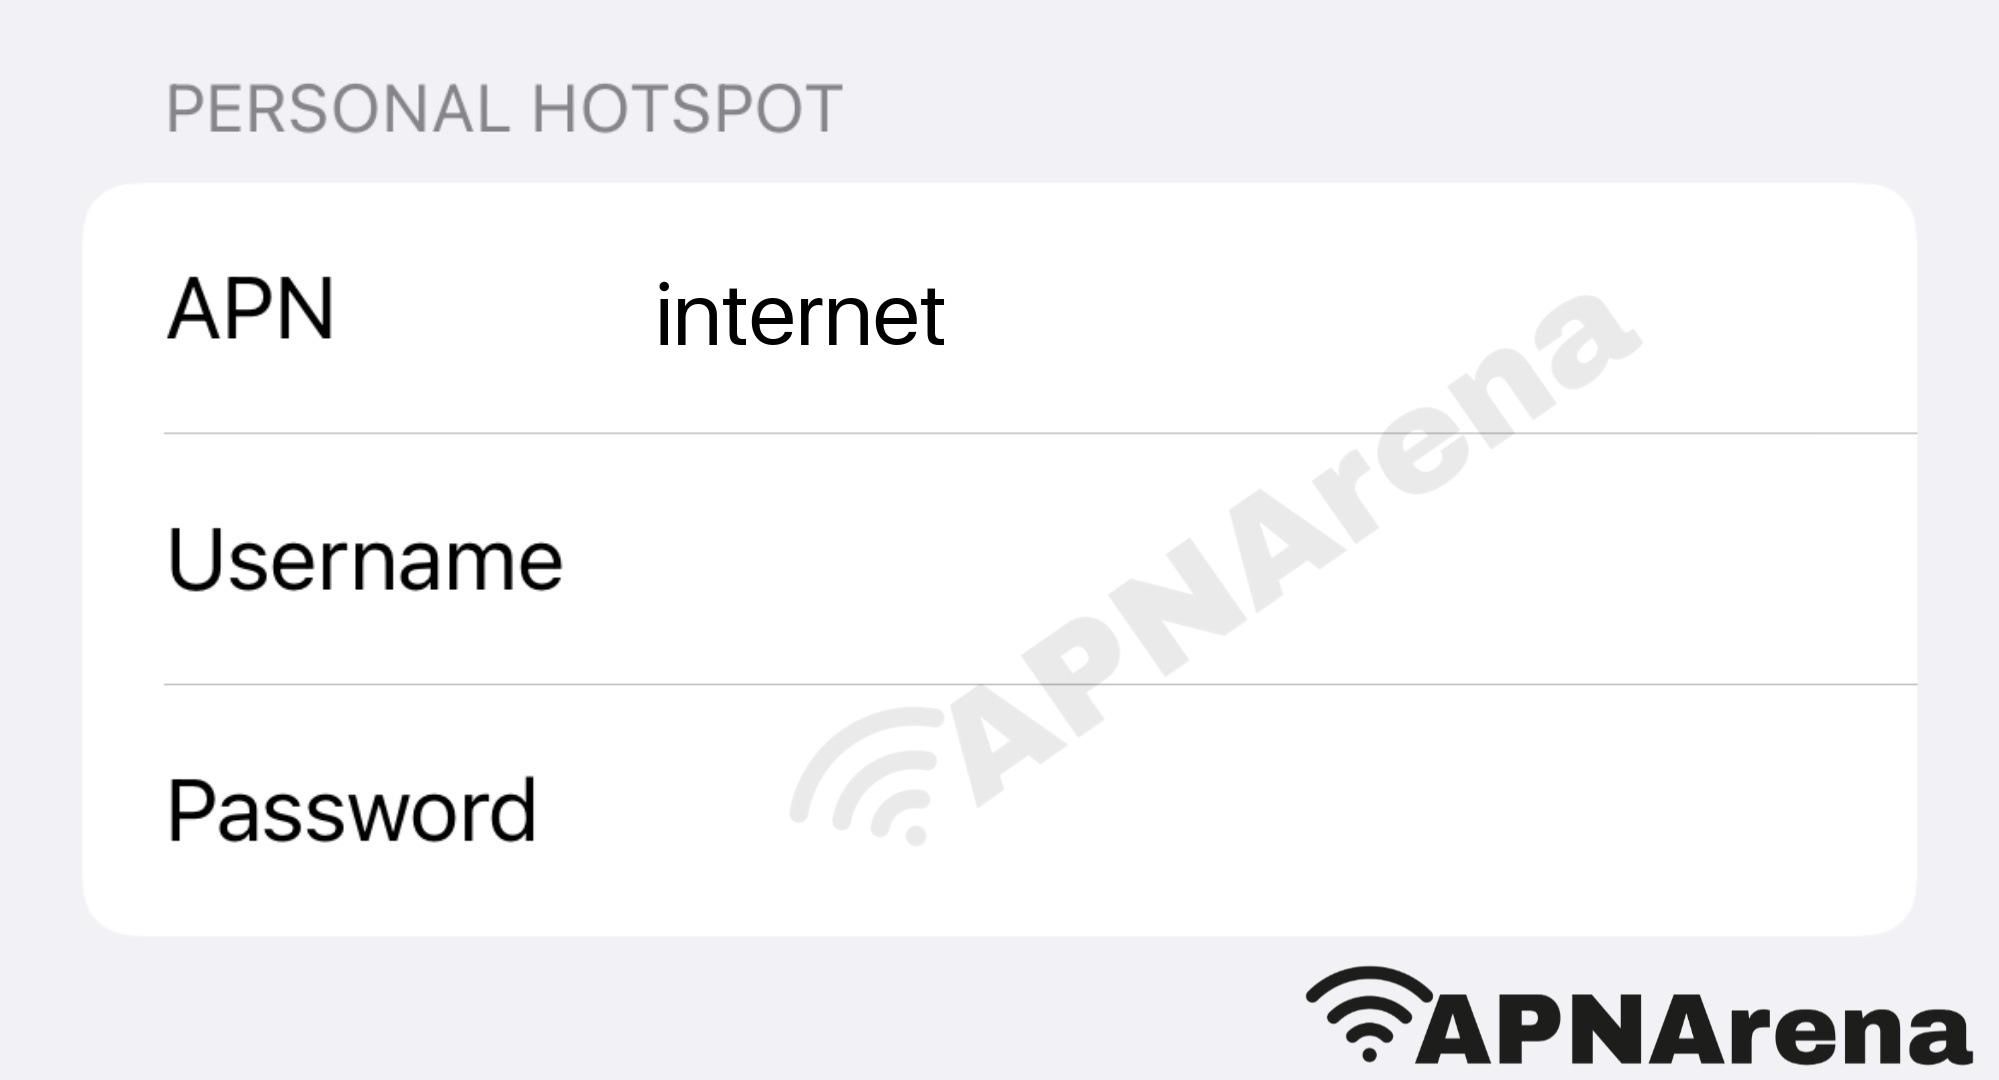 PrepaYd Wireless Personal Hotspot Settings for iPhone